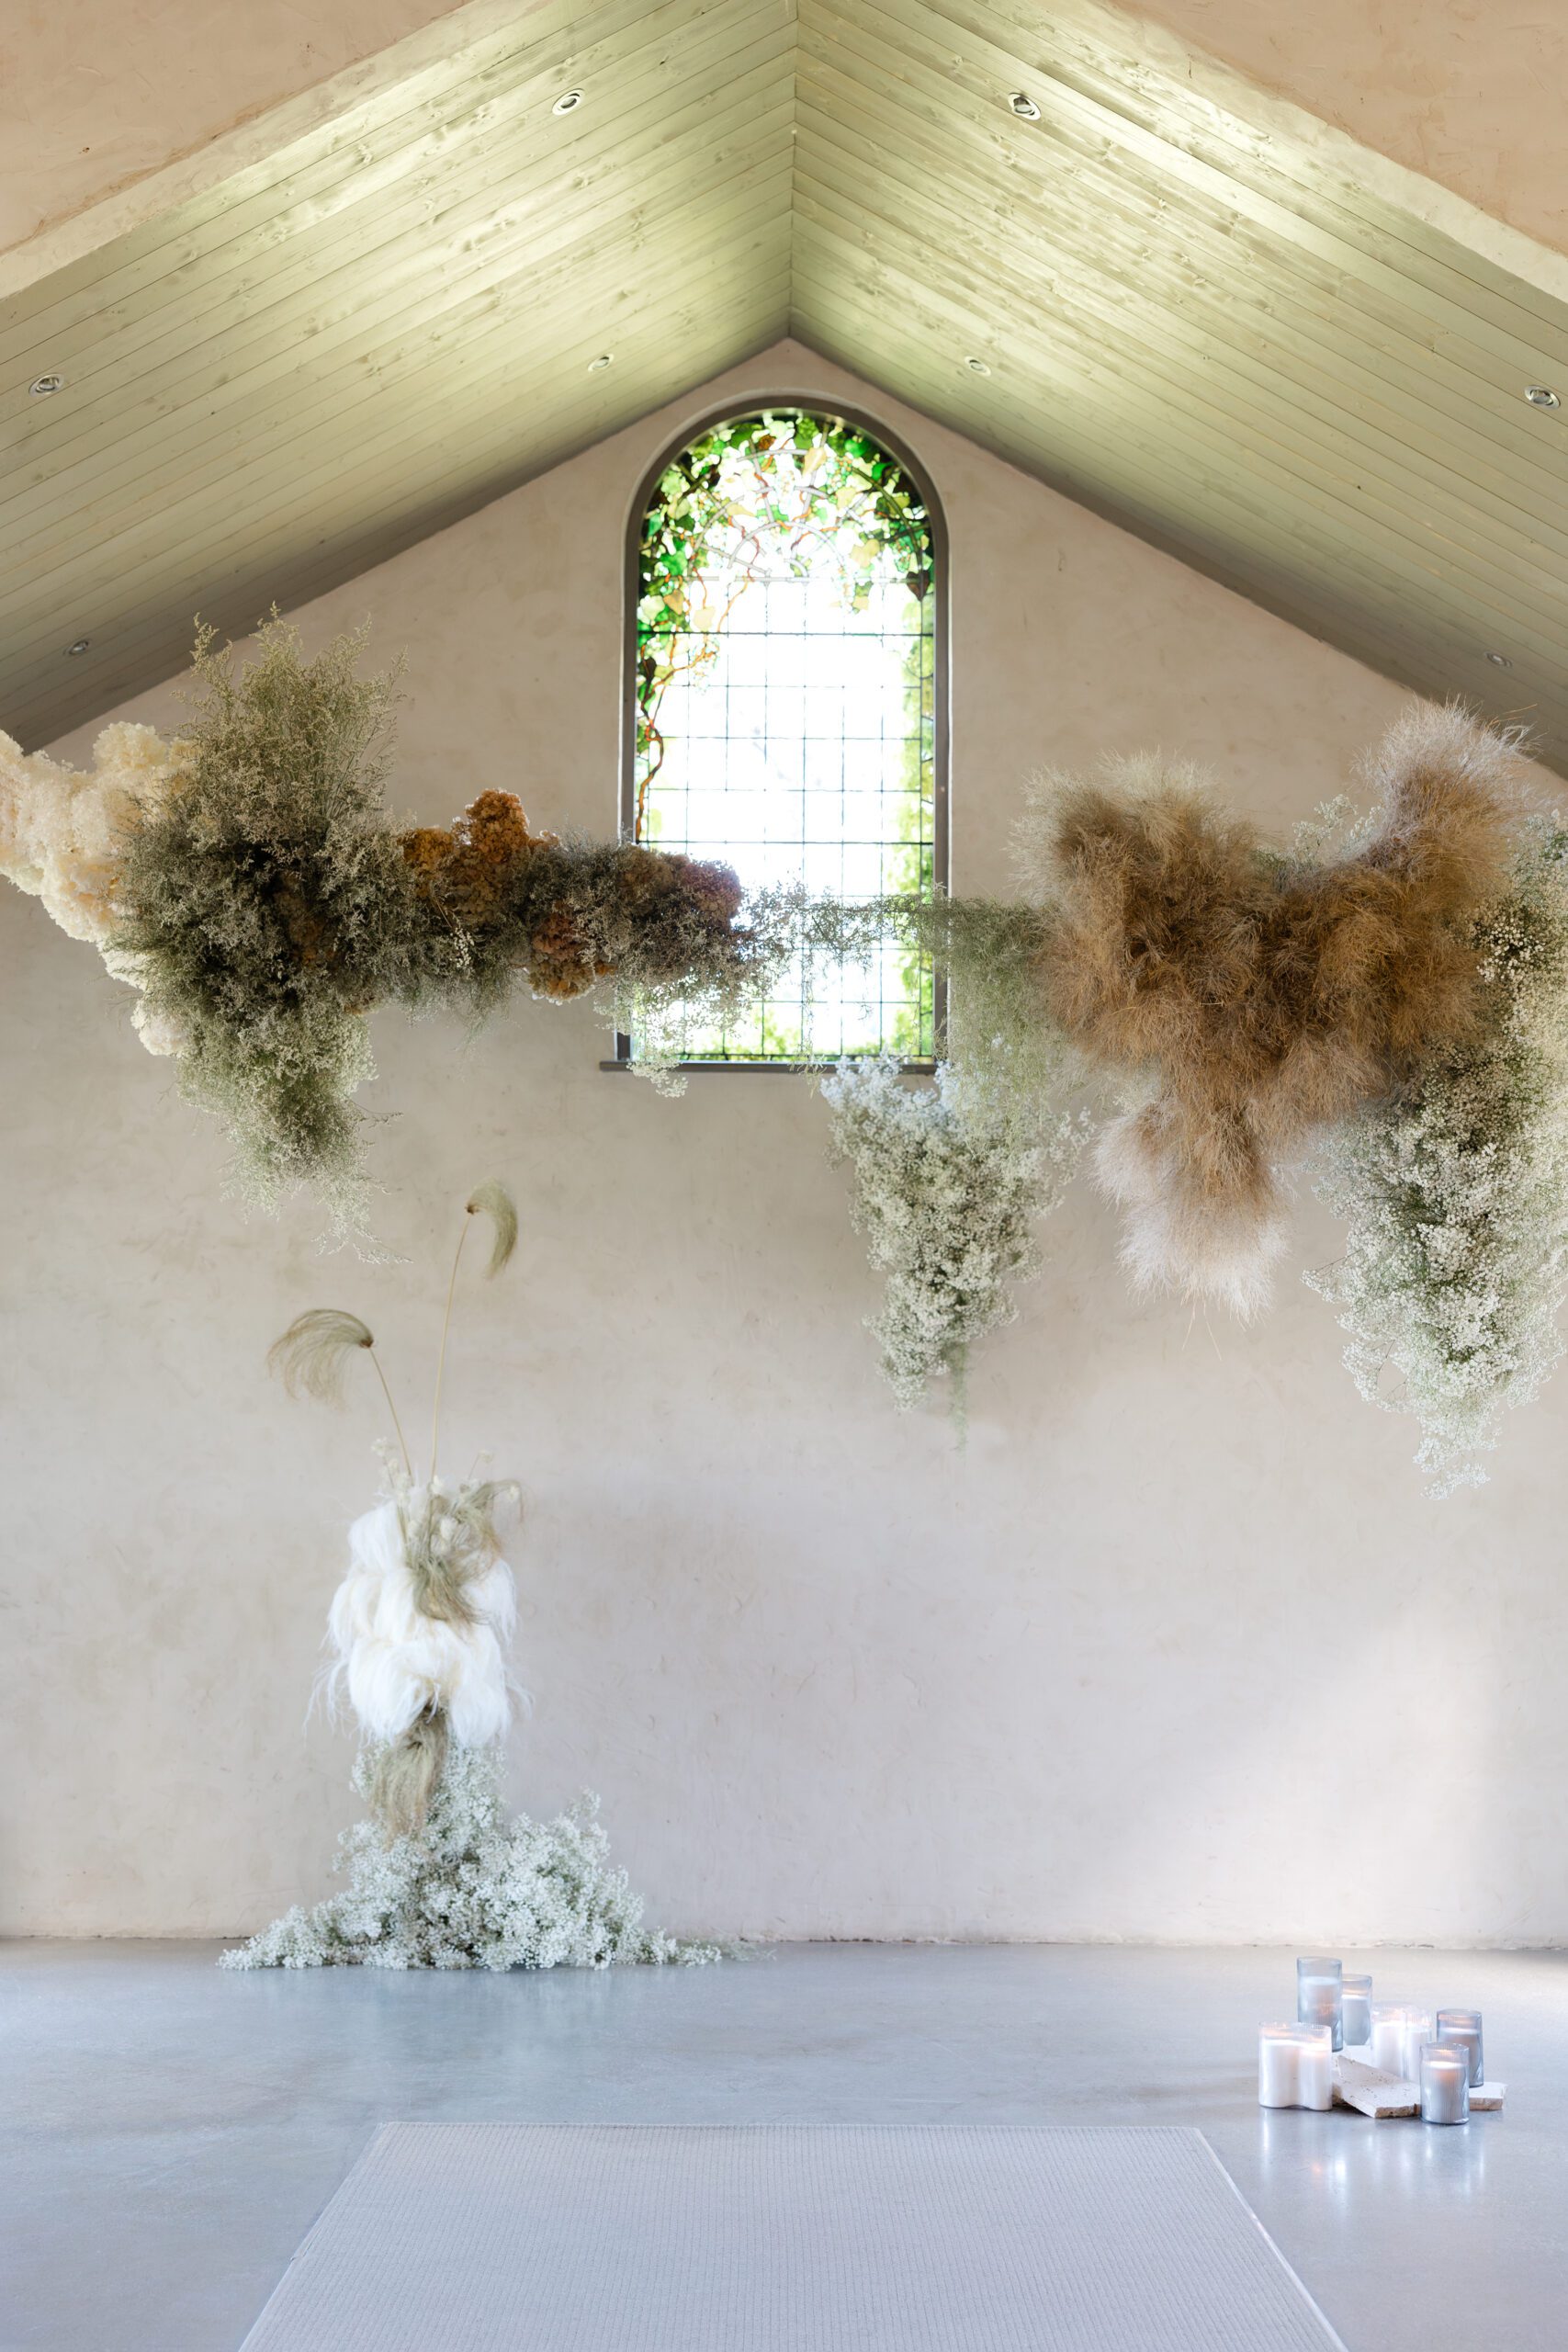 Floral installation at Stones of the Yarra Valley chapel located in the Yarra Valley